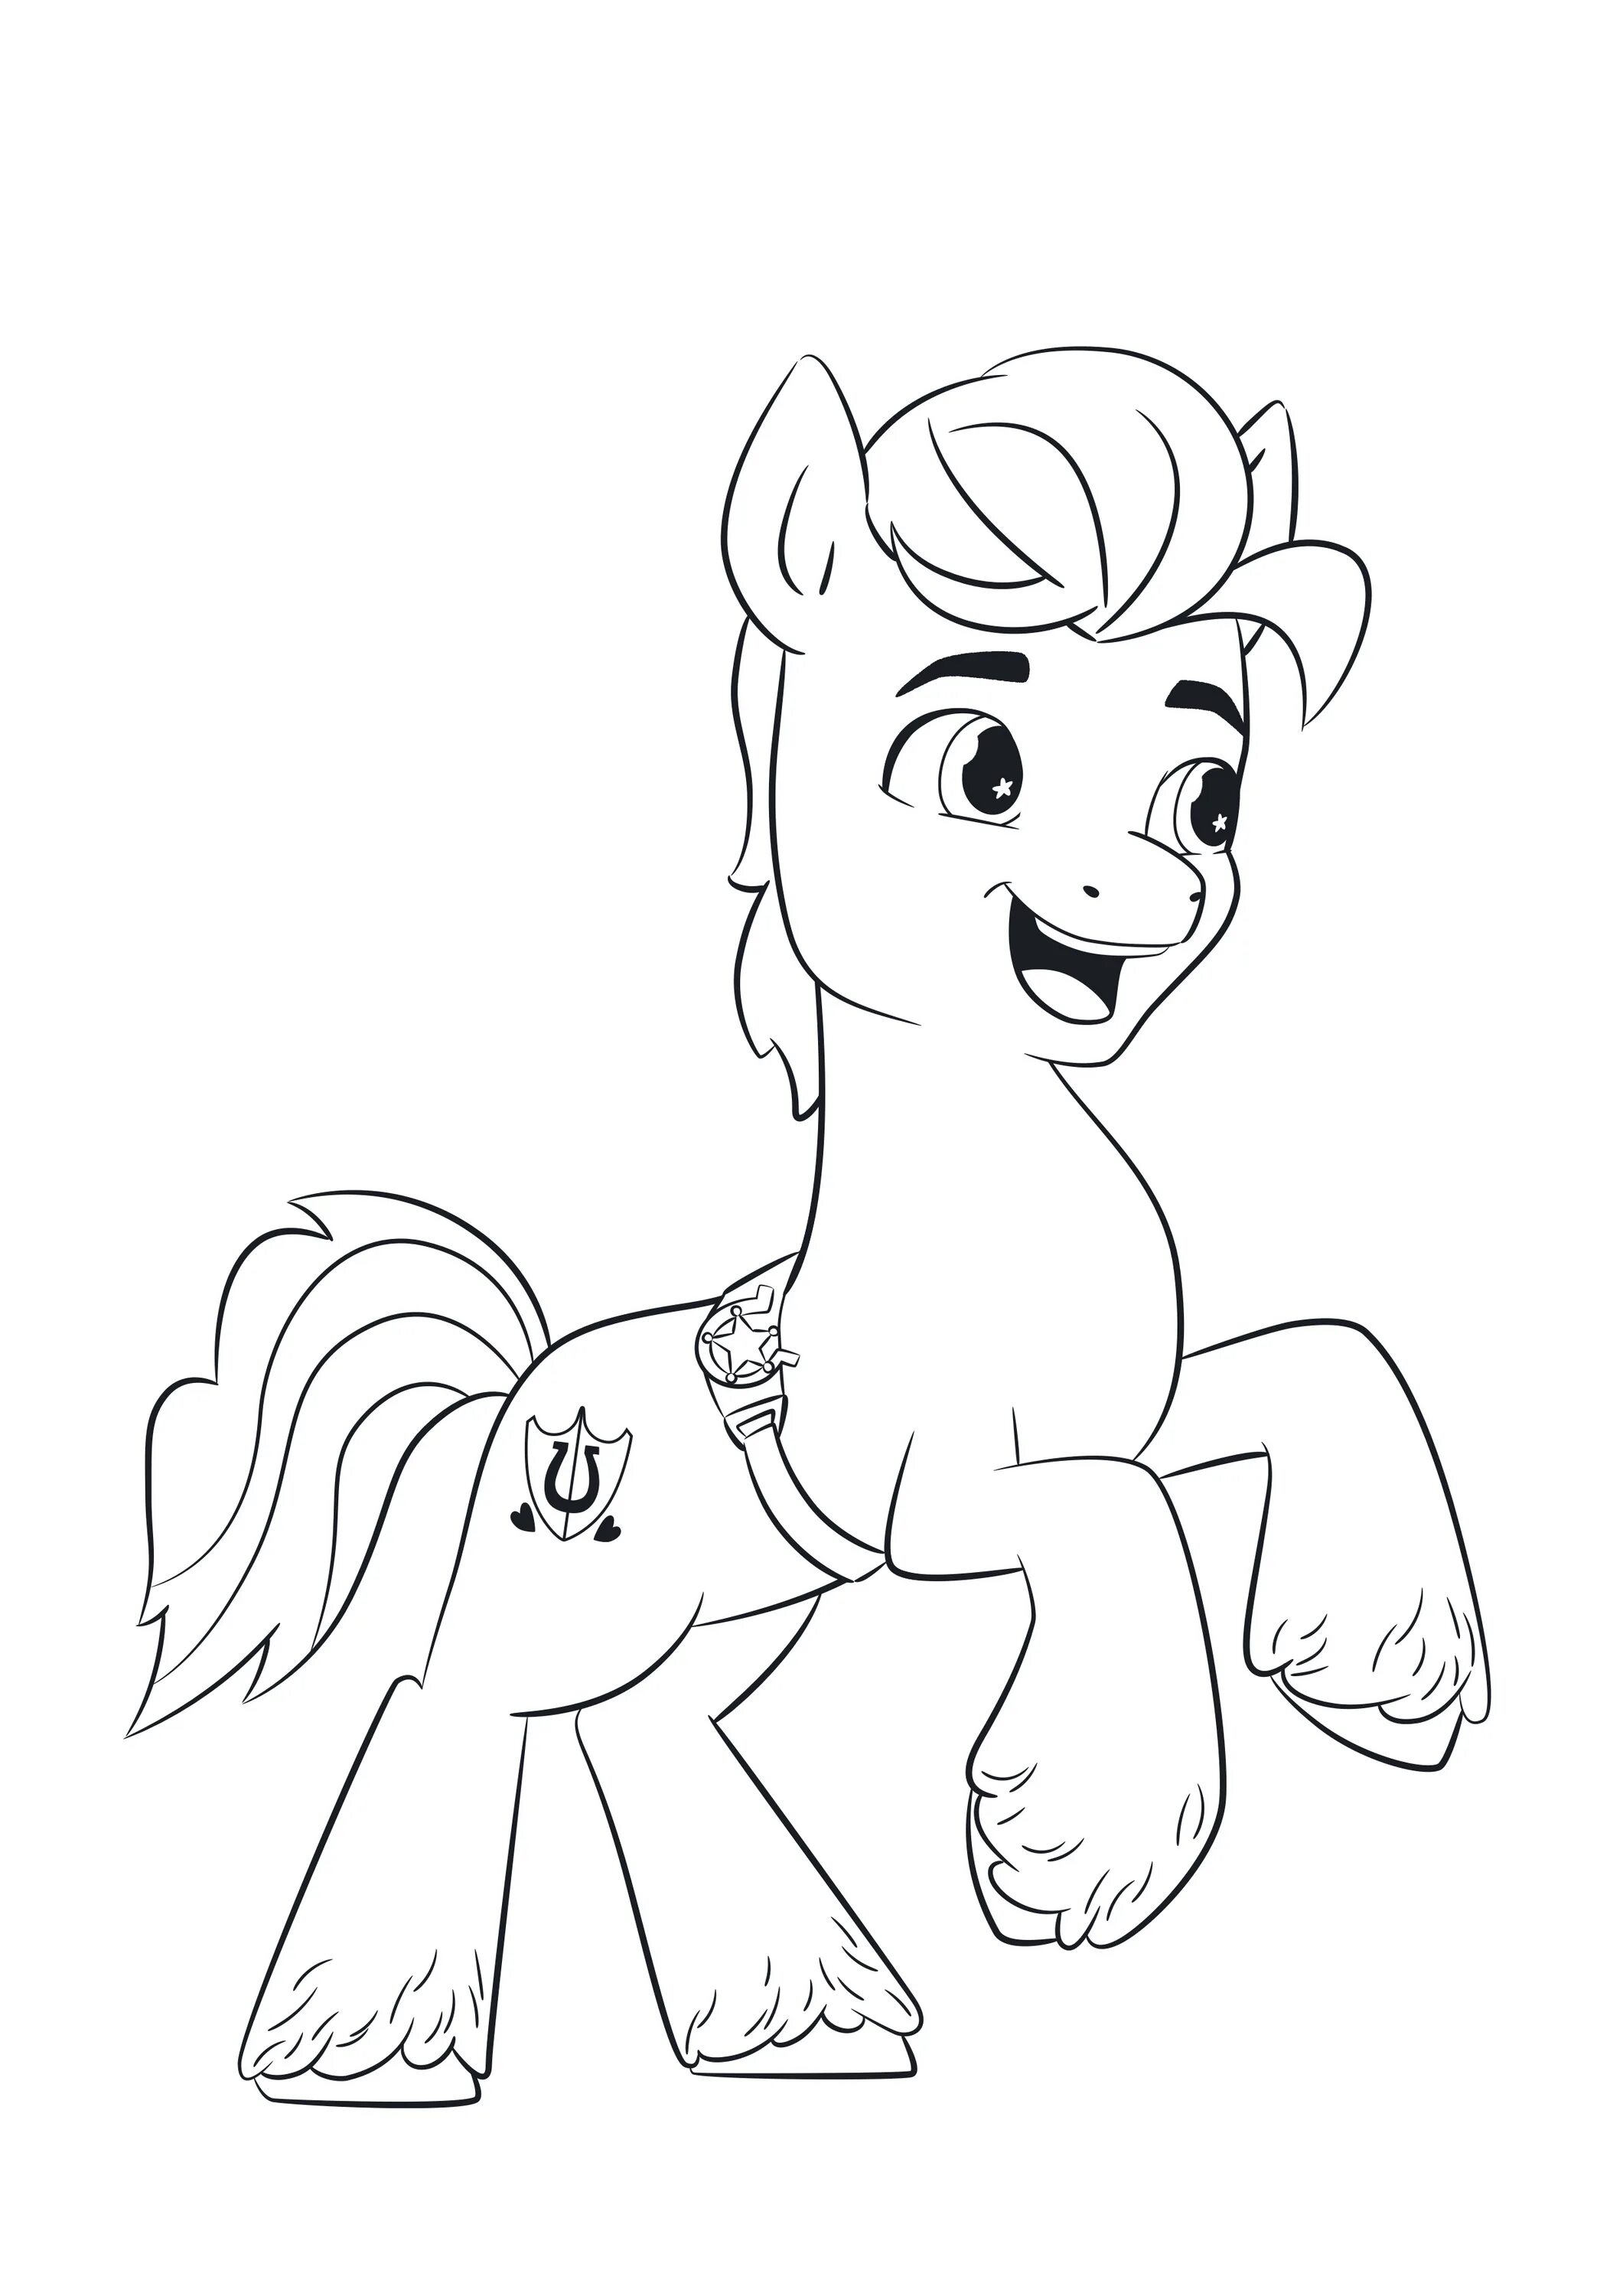 Animated pony izzy coloring page